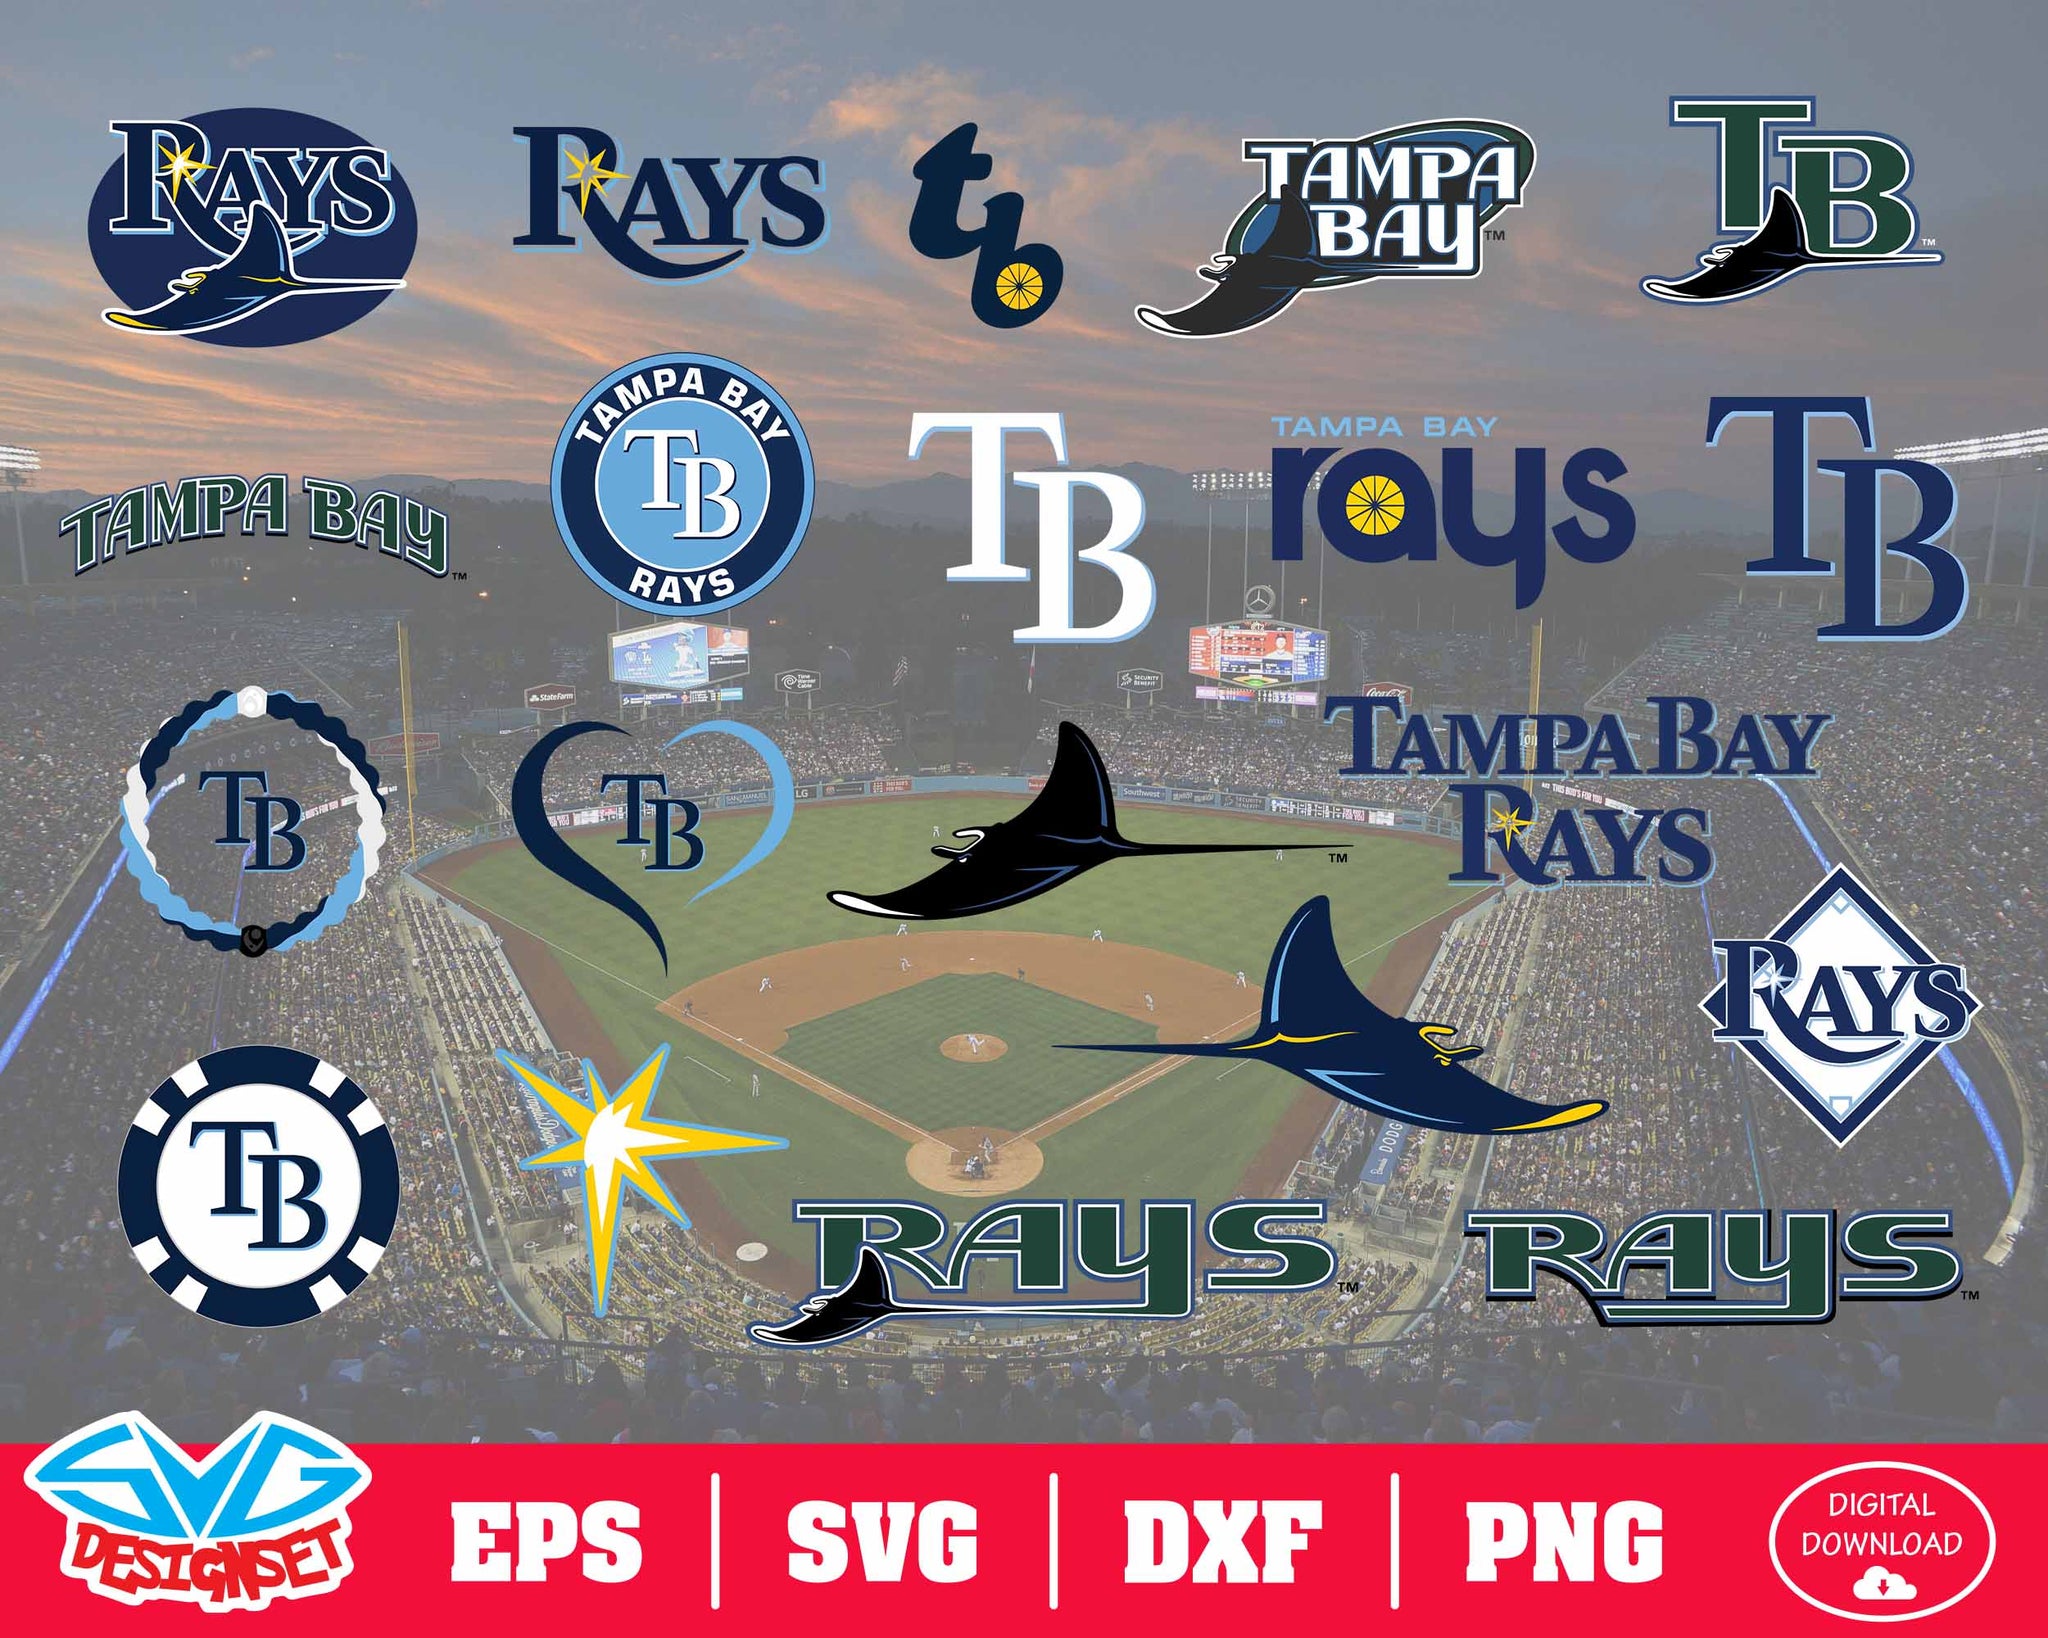 Tampa Bay Rays Team Svg, Dxf, Eps, Png, Clipart, Silhouette and Cutfiles - SVGDesignSets